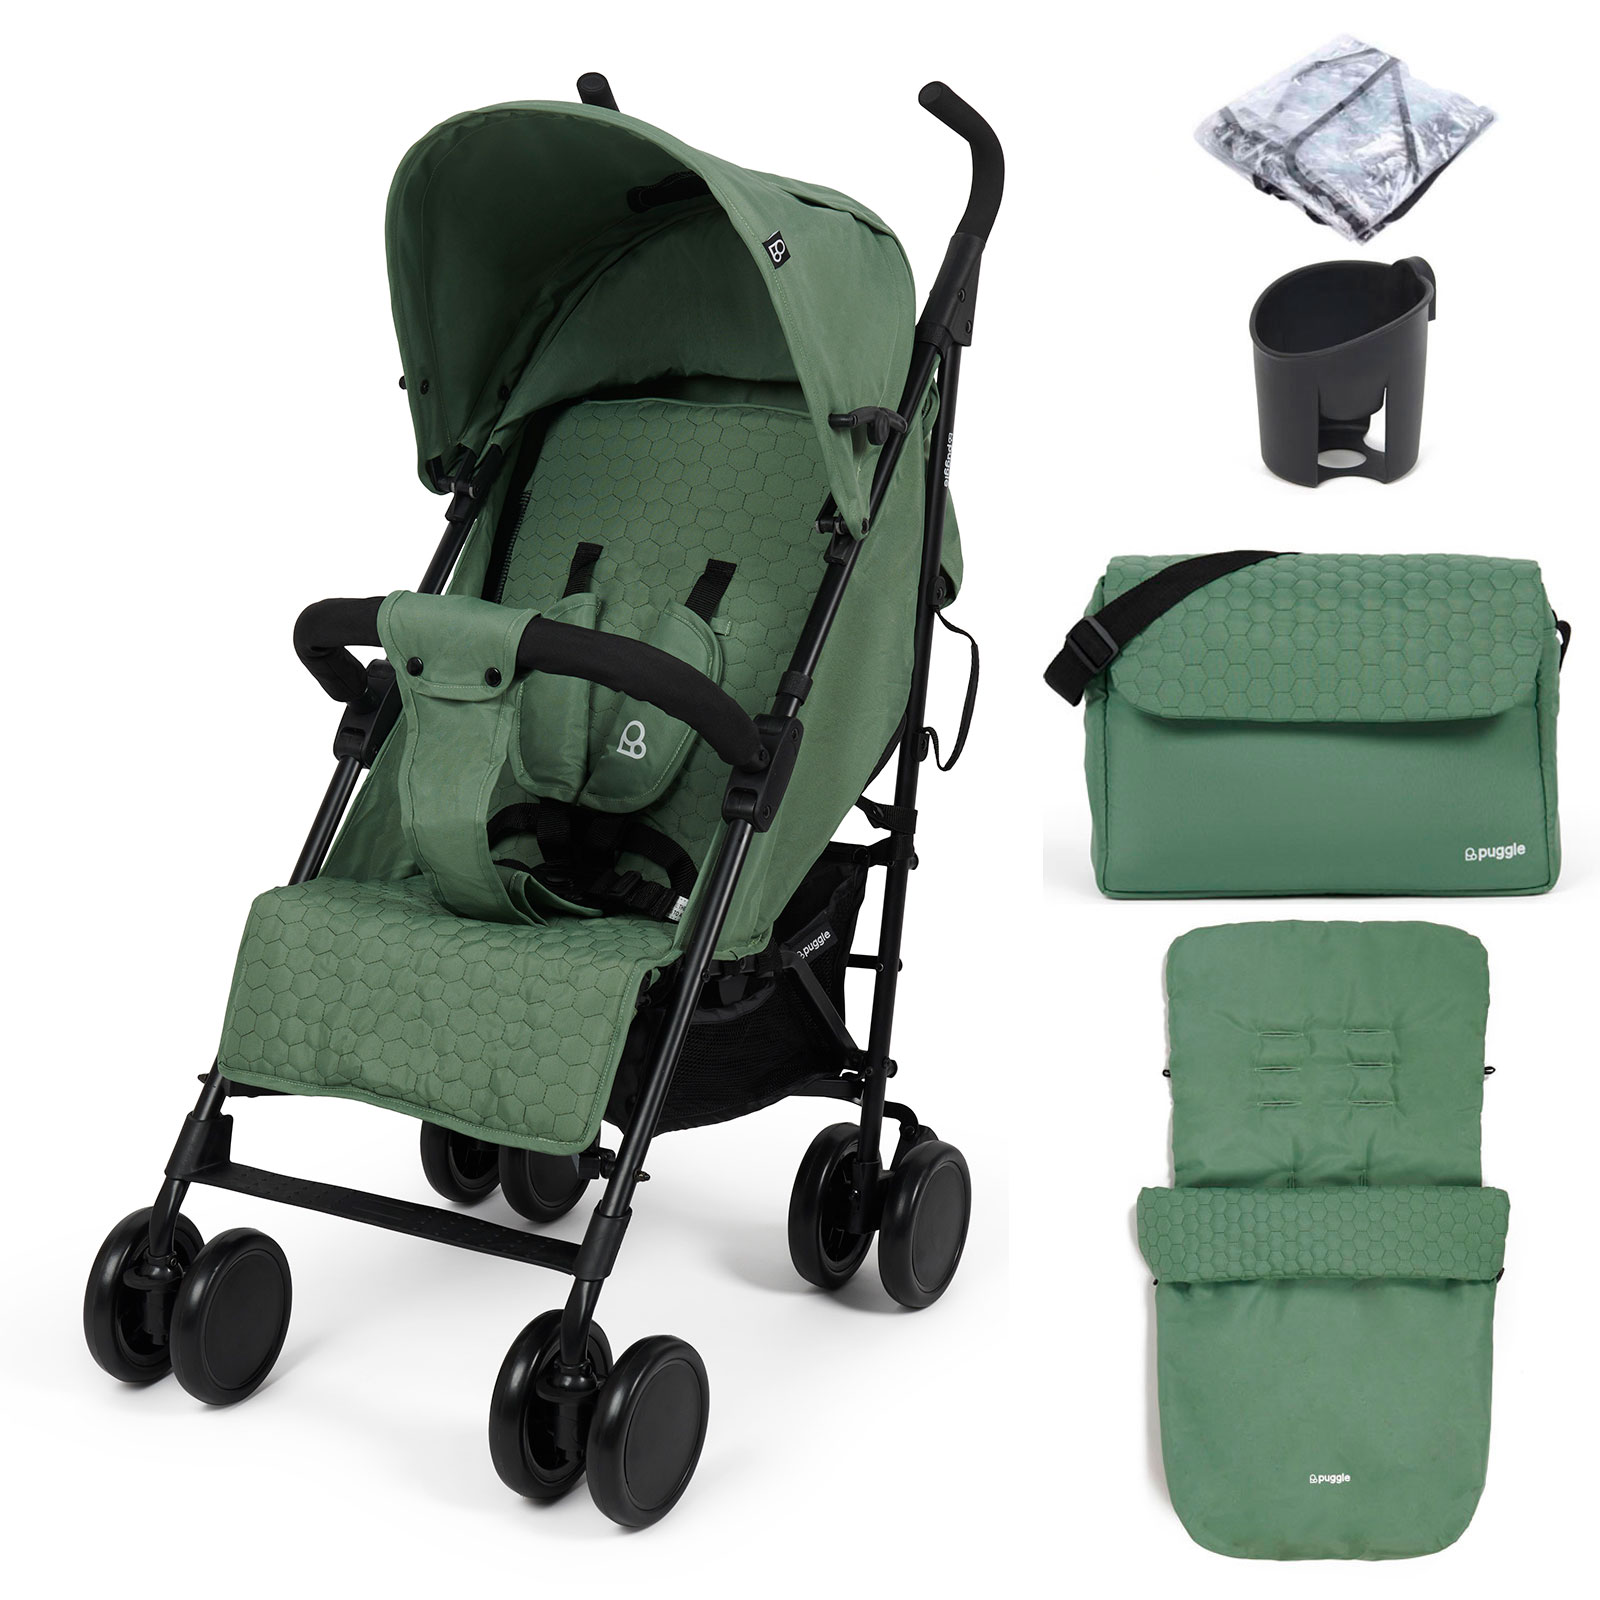 Puggle Litemax Pushchair Stroller with Raincover, Cupholder, Universal Footmuff and Changing Bag with Mat - Sage Green